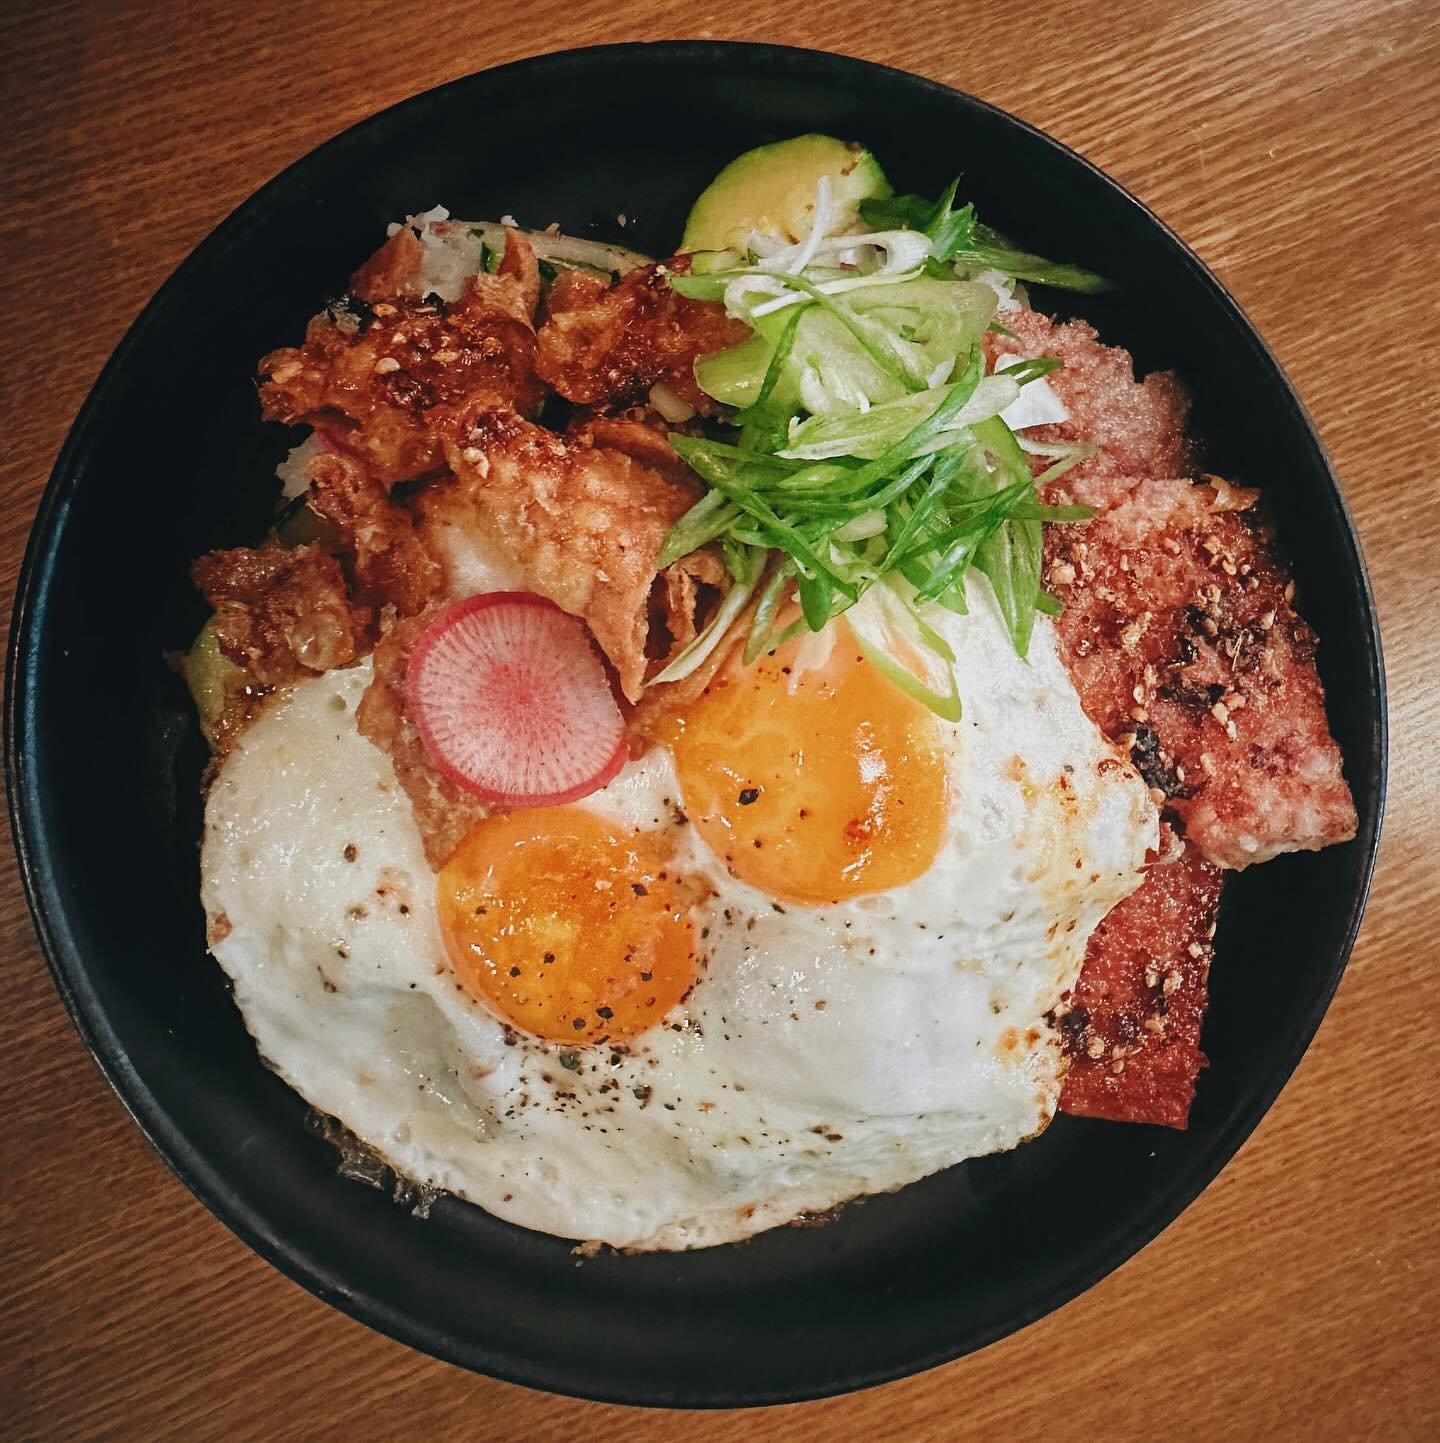 Spam Bowl is back for Mothers Day!

Served with 2 sunny side eggs, zucchini, chili oil, chicken skin, &amp; furikake 🤤

Some of us are no stranger to spam for breakfast (thanks mom!) but if you haven&rsquo;t had a homemade, nitrate free spam this is